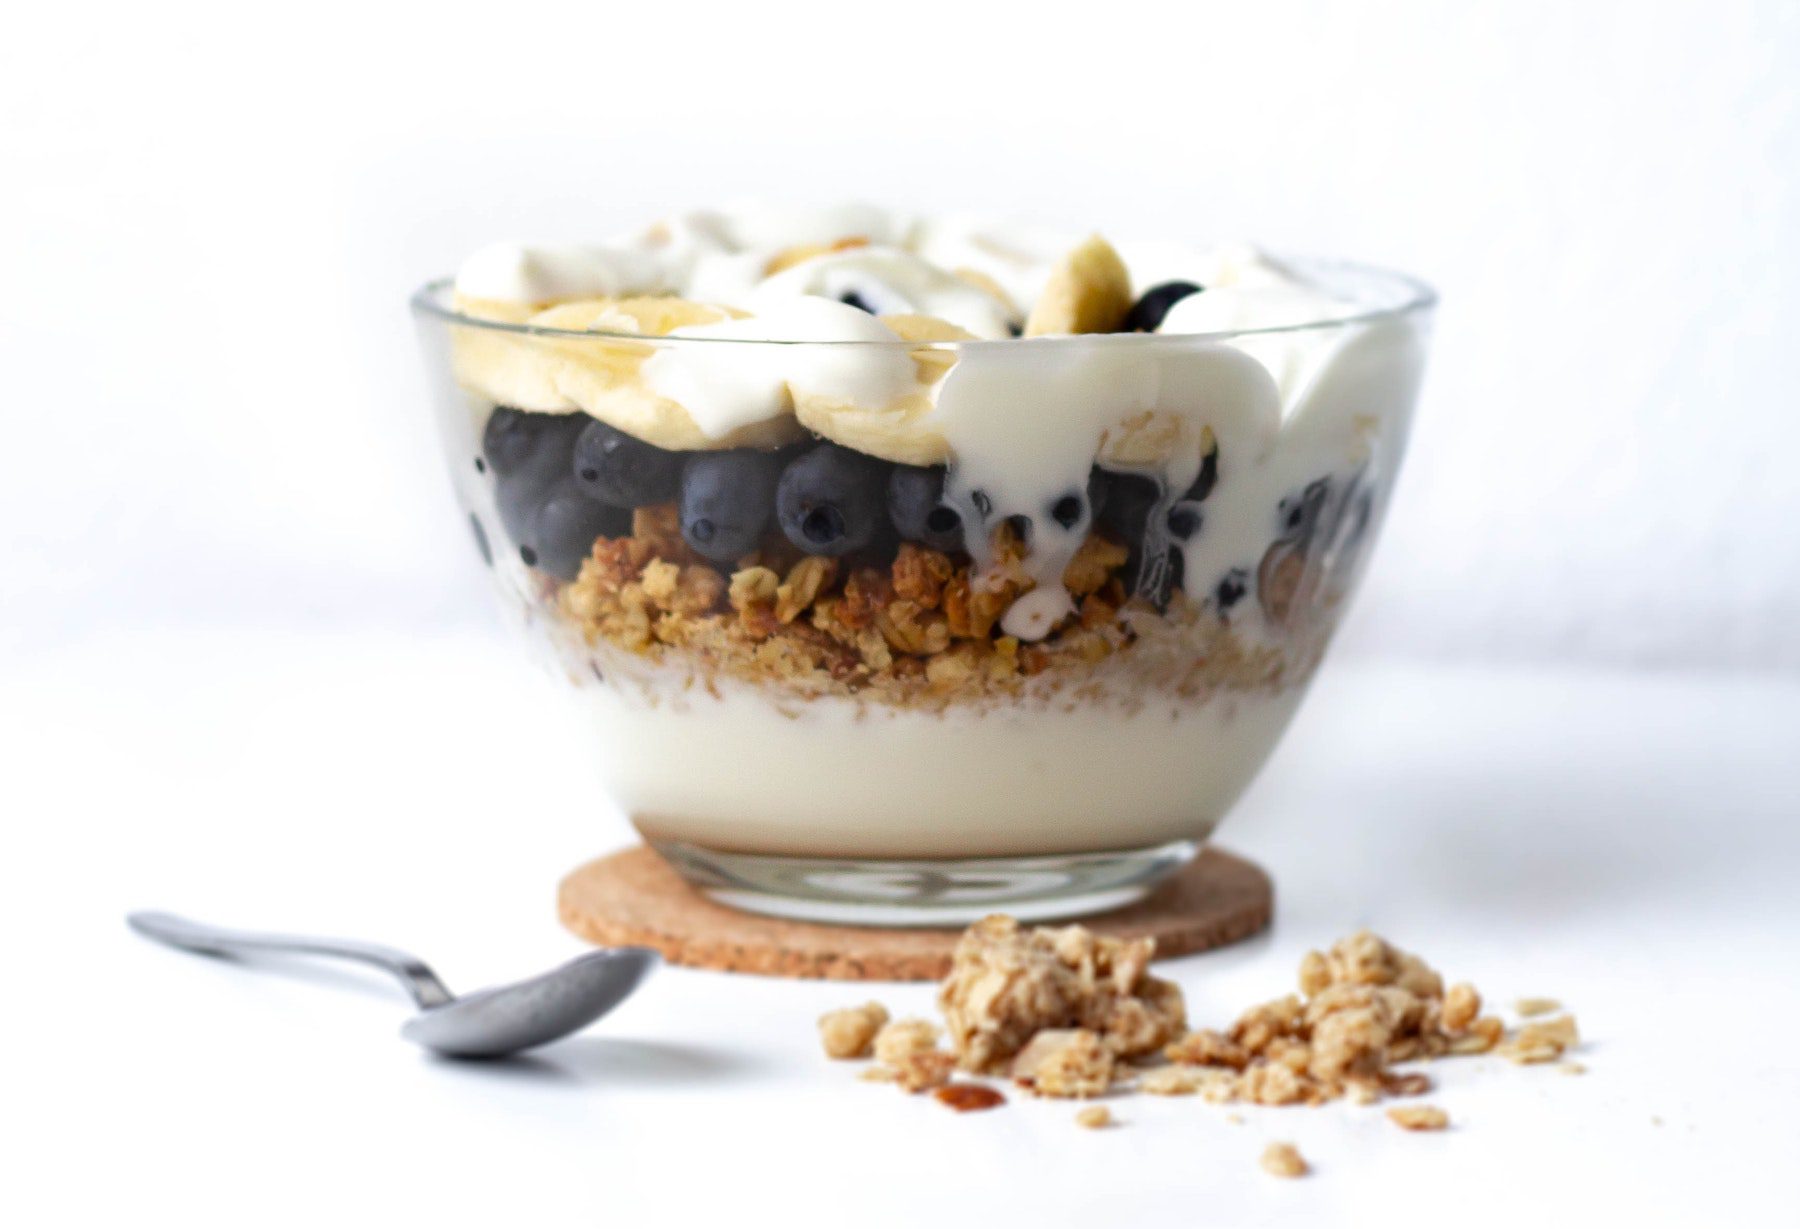 A clear glass dish of yogurt, blueberries, granola, and banana slices with a spoon nearby on a white counter.